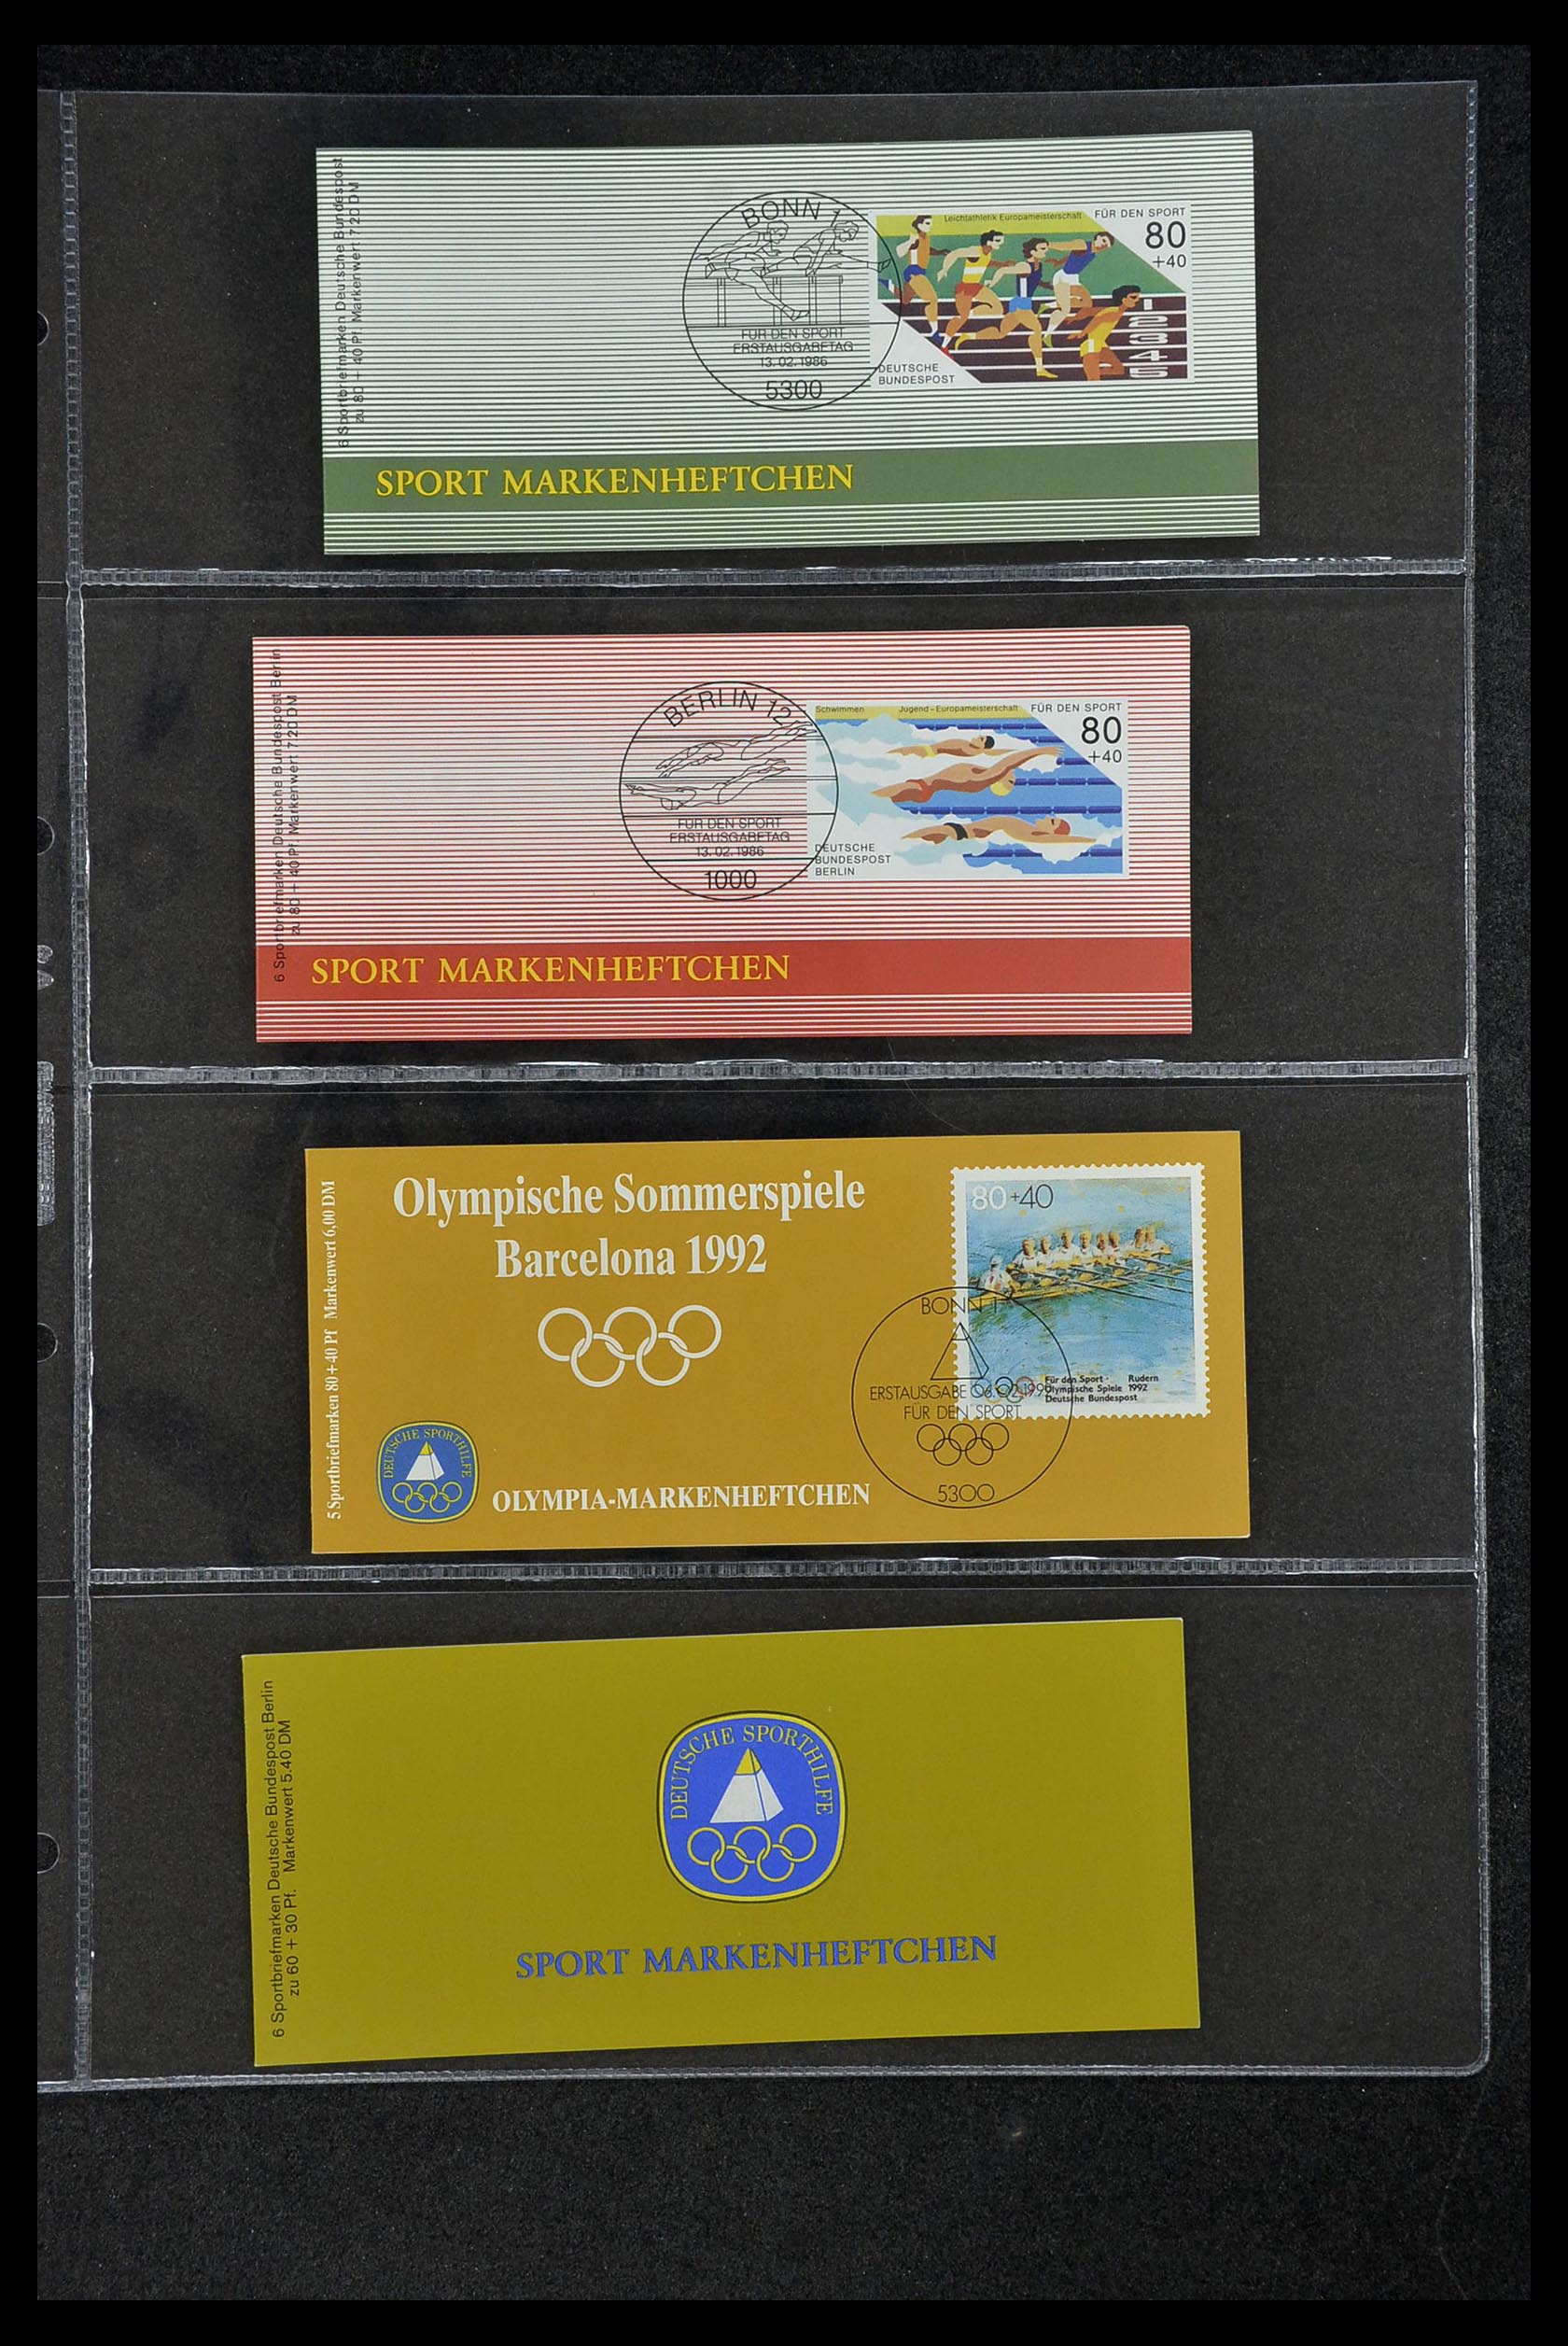 34317 032 - Stamp collection 34317 Germany private stampbooklets 1983-2000.